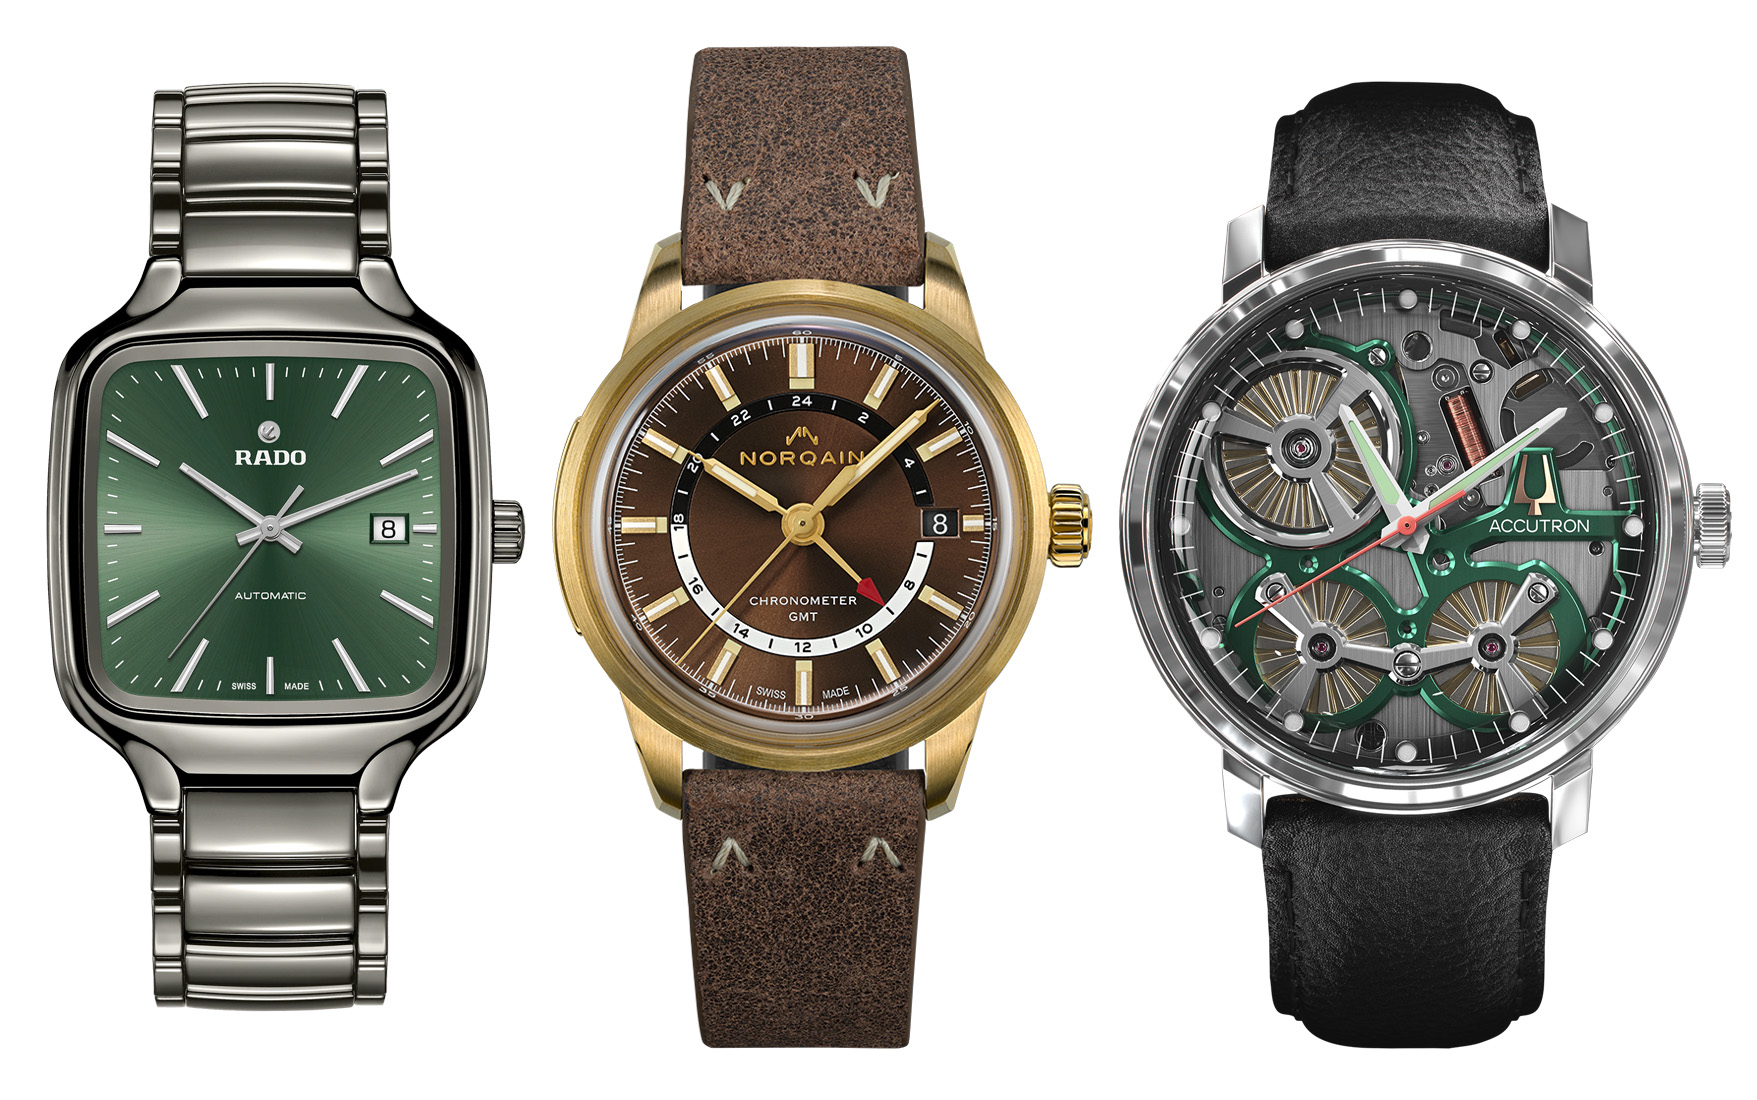 WATCHES OF THE YEAR: WatchPro Presents The Best Statement Style